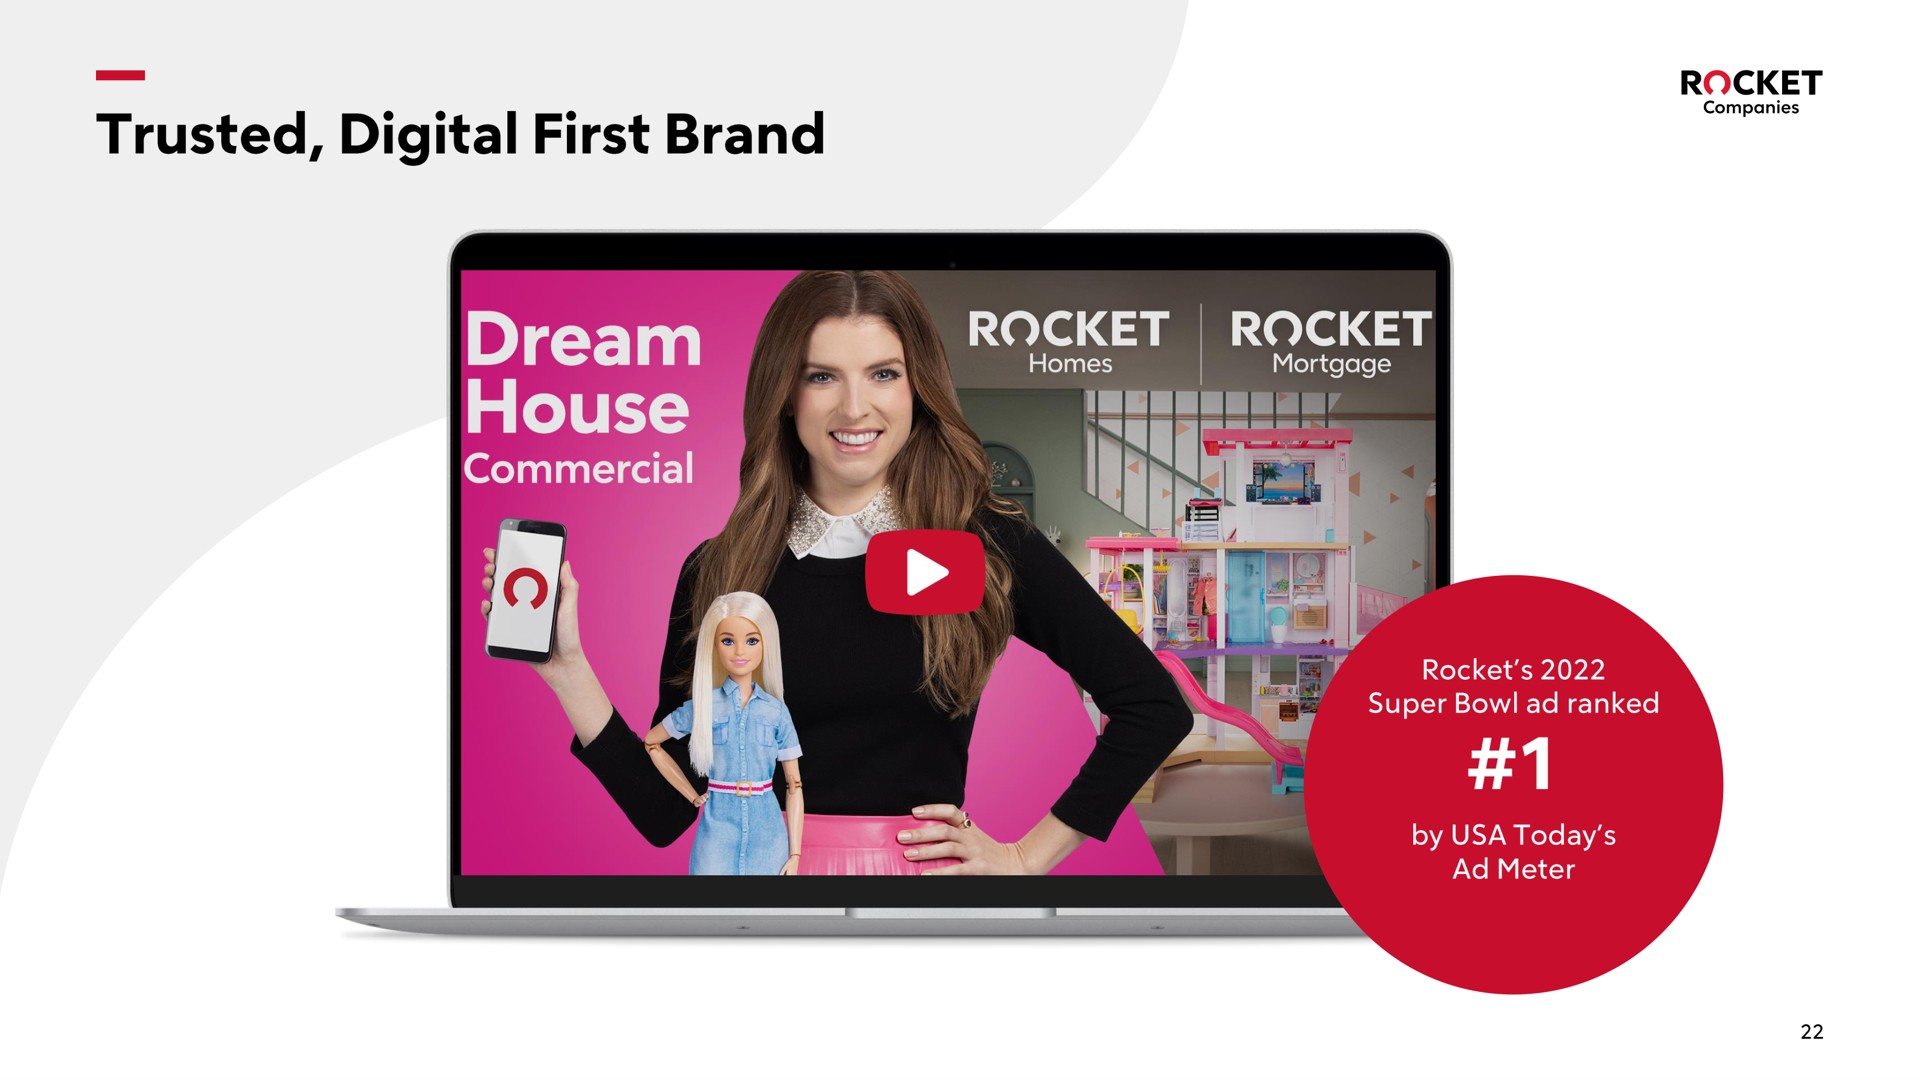 trusted digital first brand dream house commercial rocket a | Rocket Companies